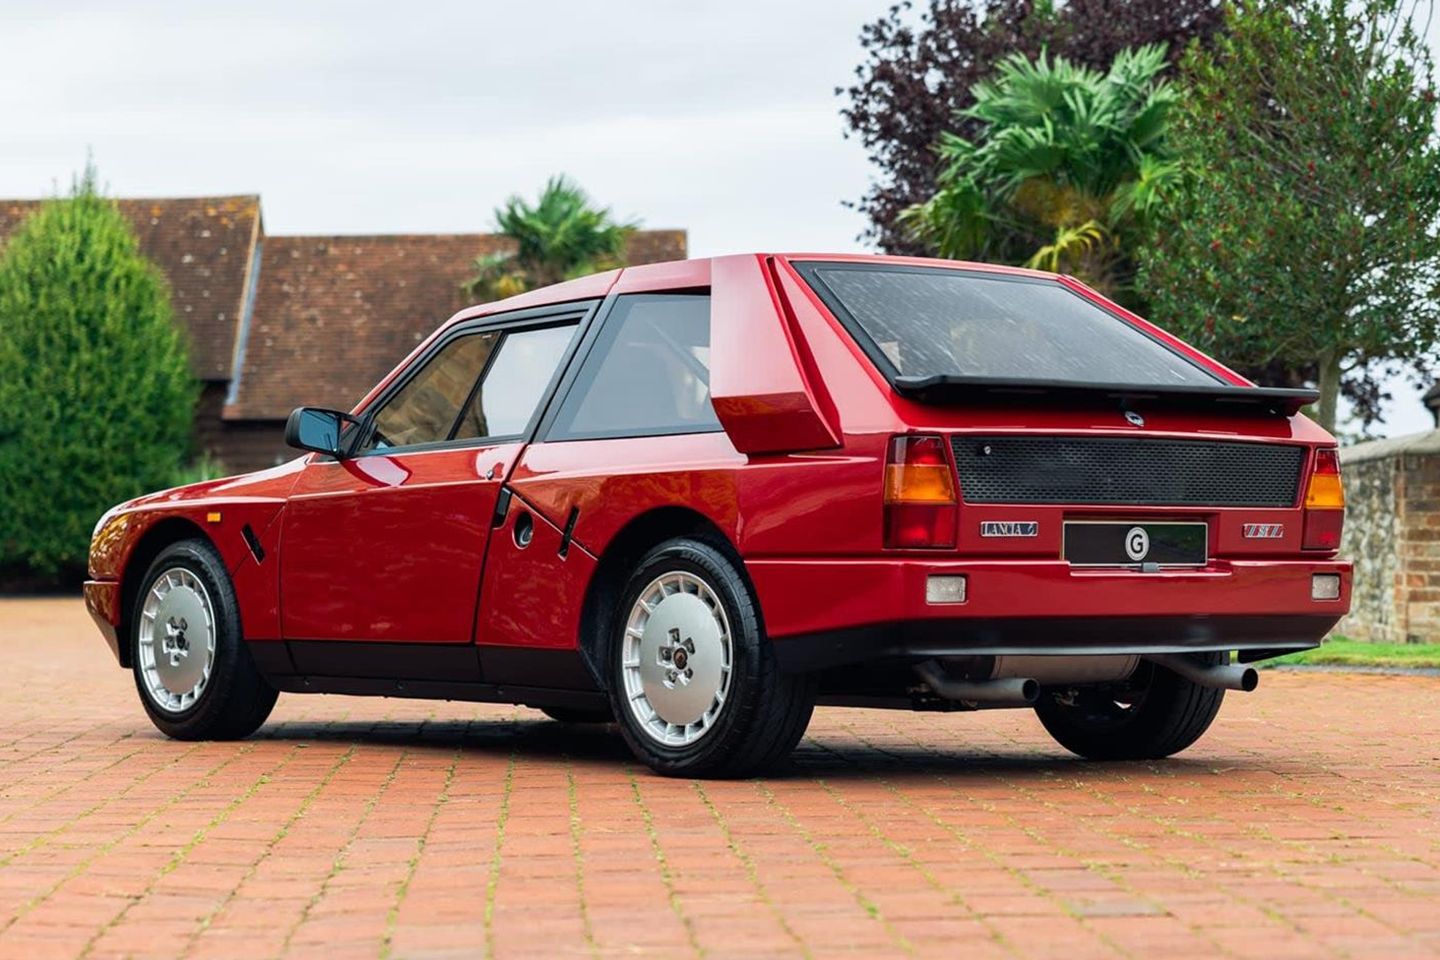 Mind-blowing Lancia Delta S4 Stradale for sale - PistonHeads UK